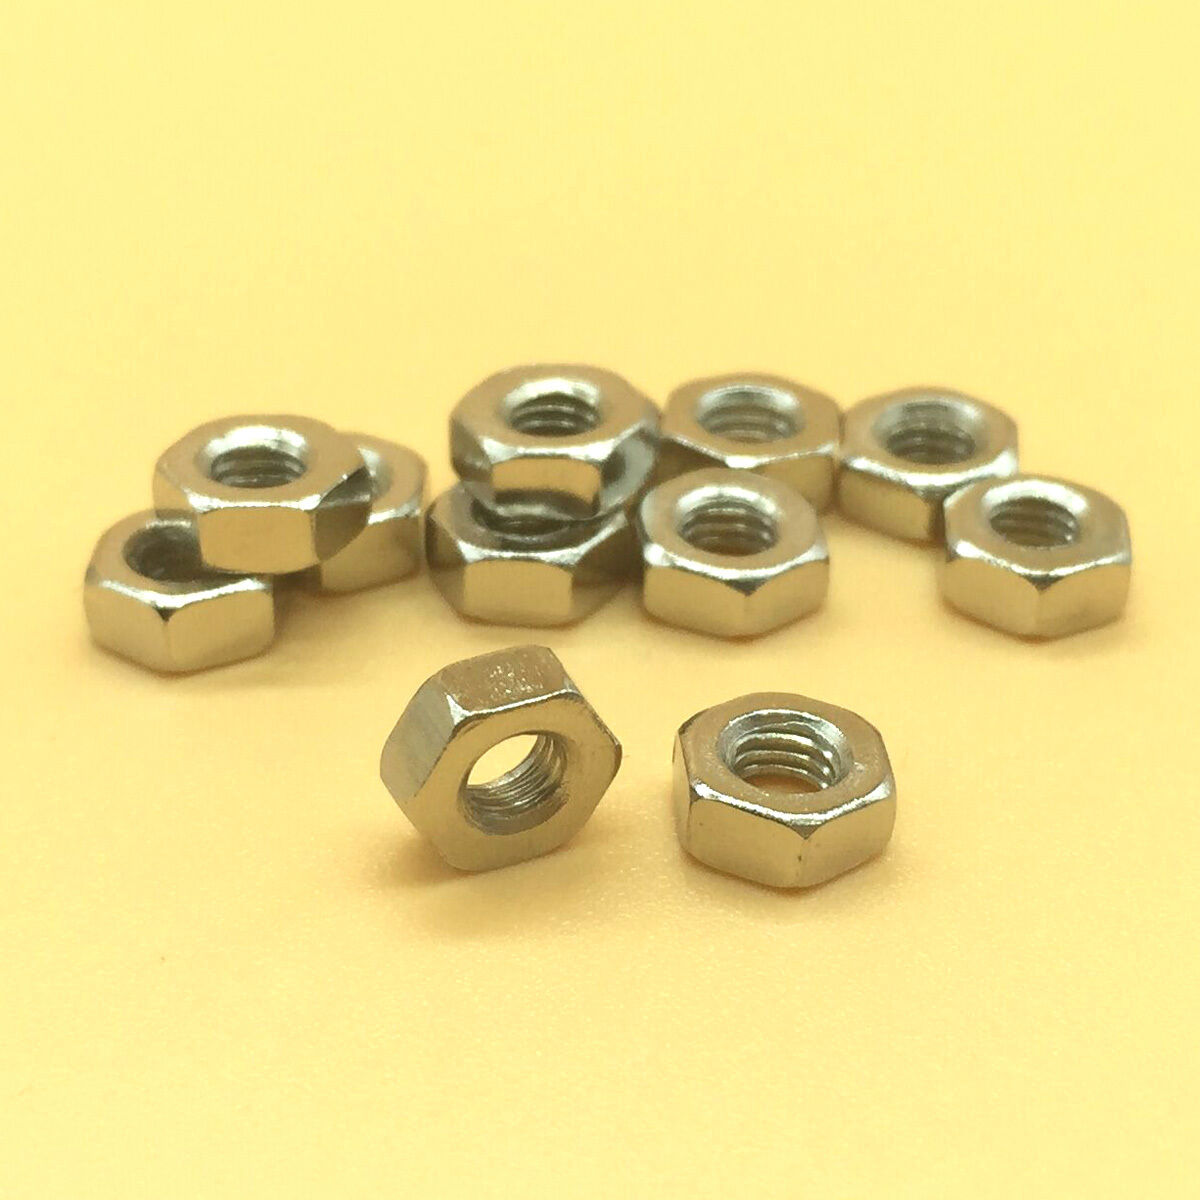 50pcs M4 x 0.5 Stainless Steel Hex Nut Right Hand Thread [M_M_S]